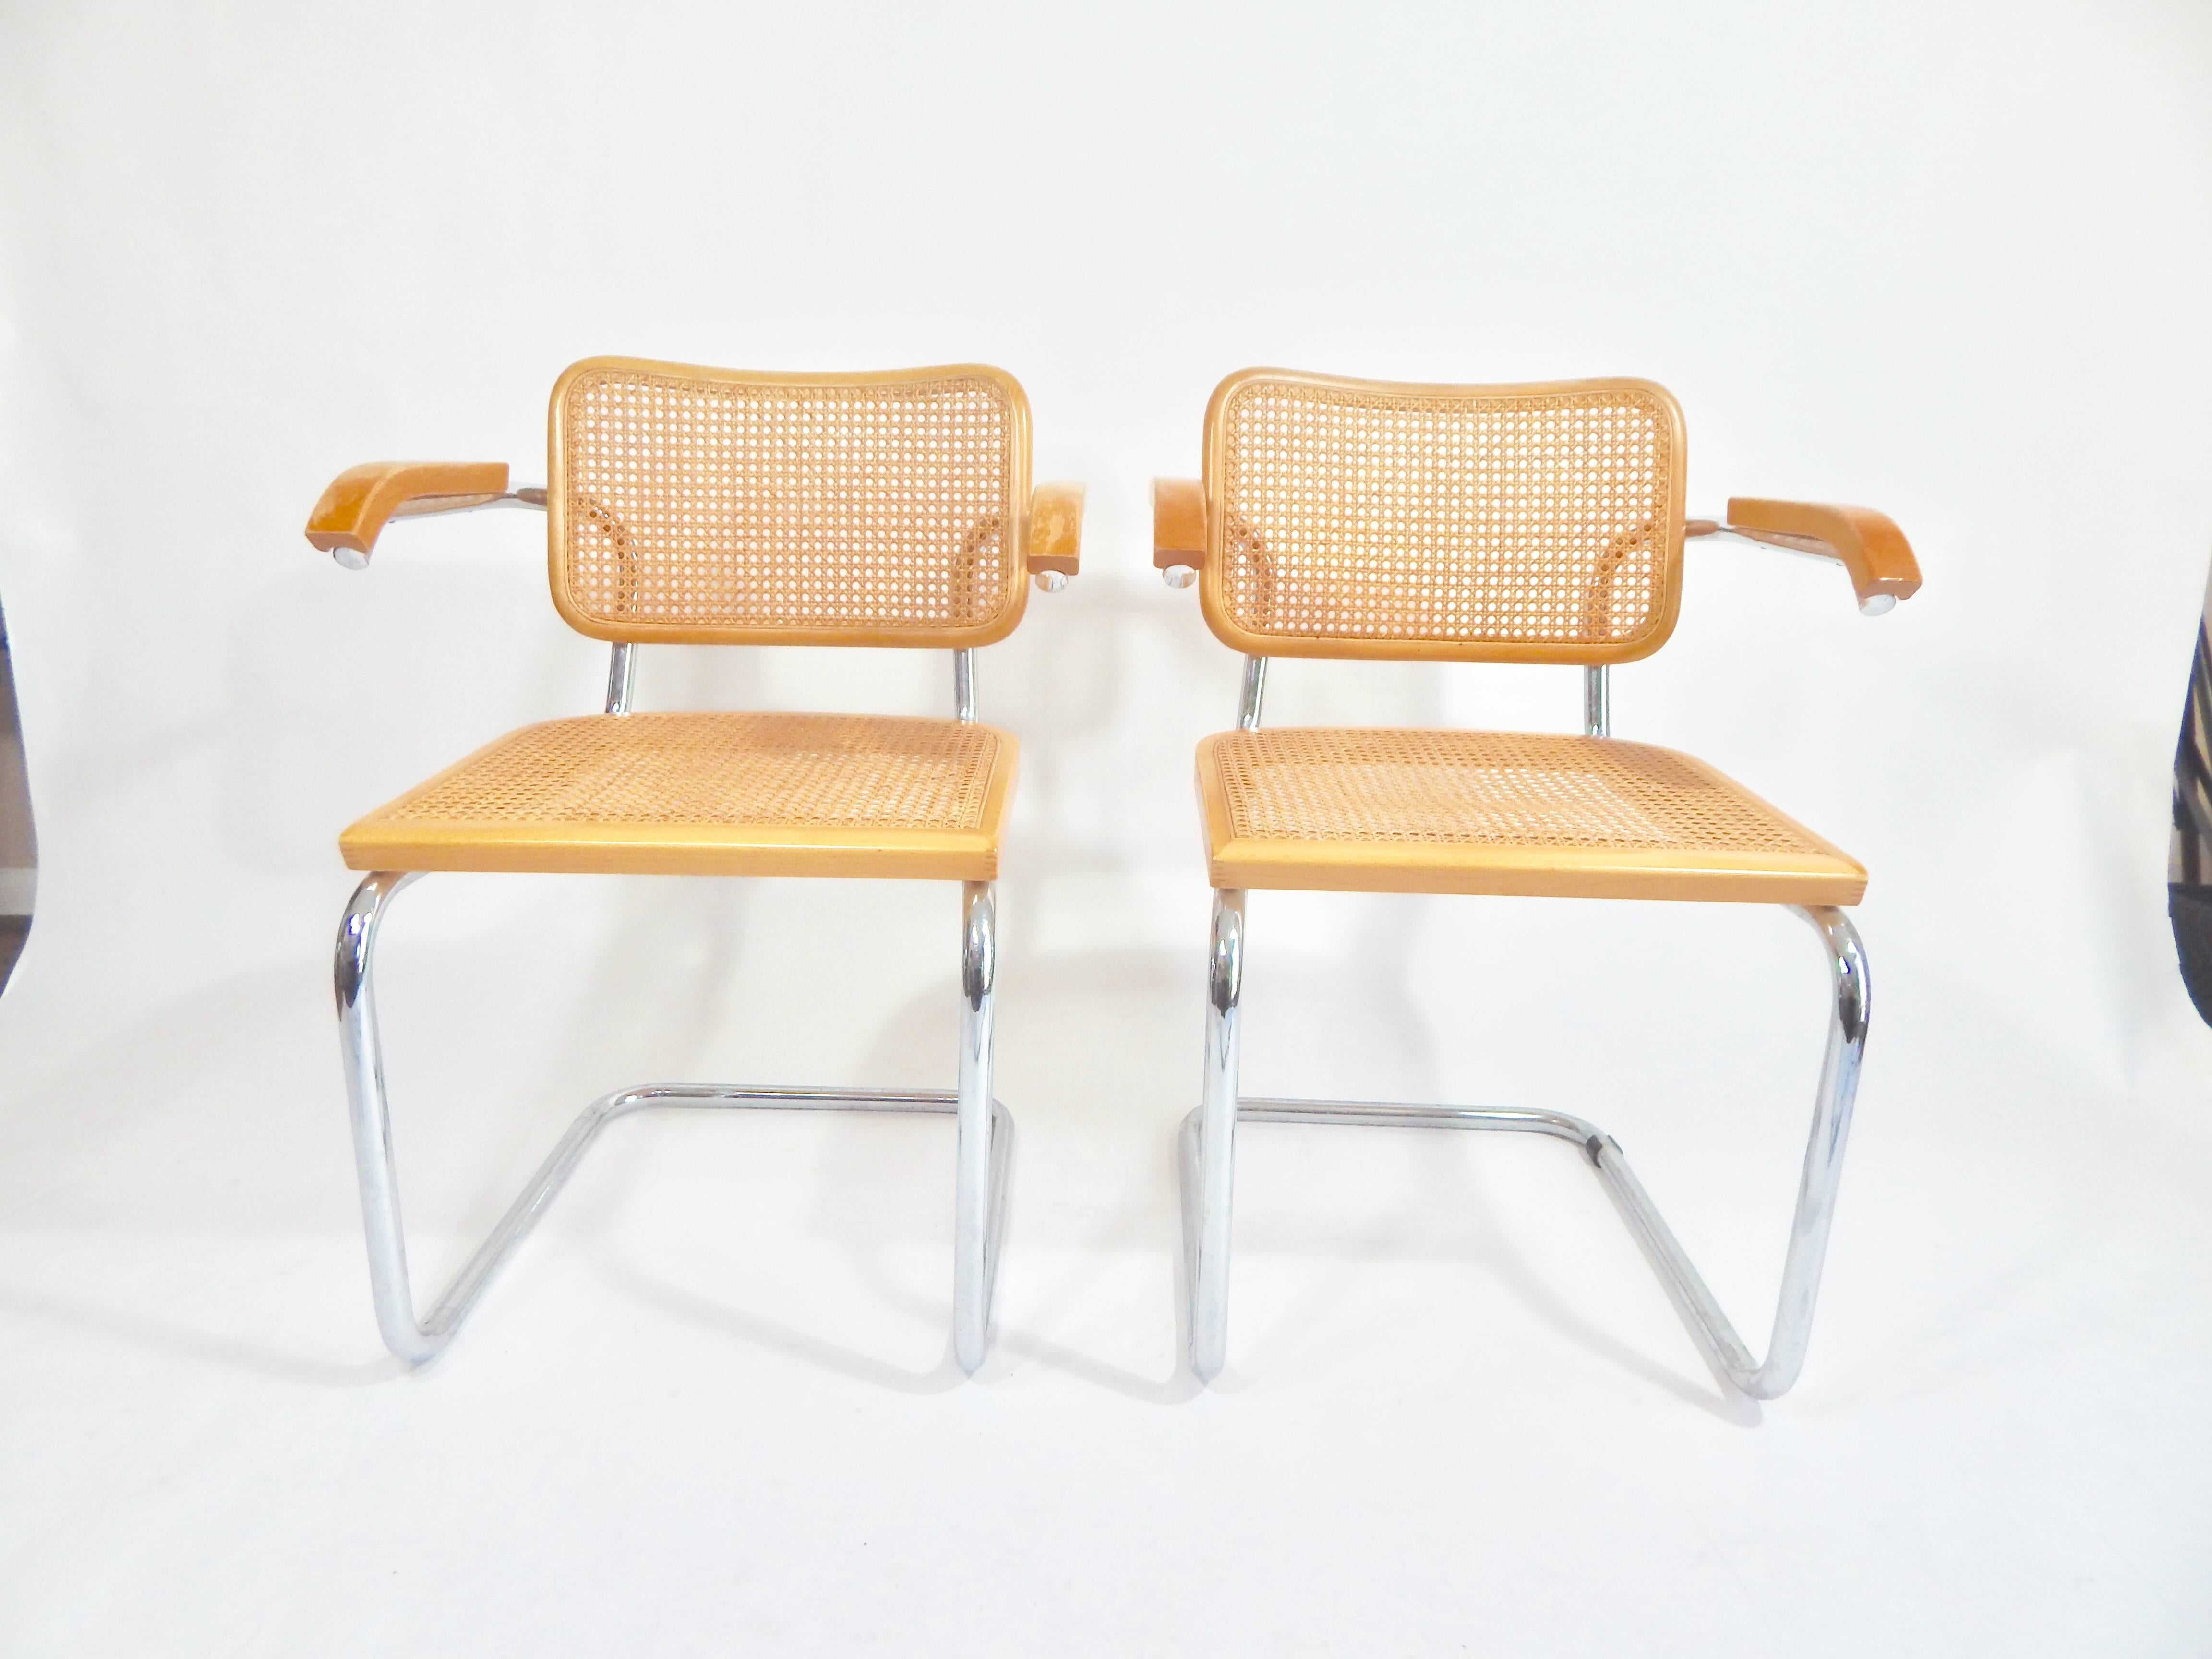 Midcentury pair of Marcel Breuer Cesca chairs, 1970s production. Both marked Made in Italy. Good original condition. Some wear to armrests.
Additional measurement: Top of armrest to floor 27.25.